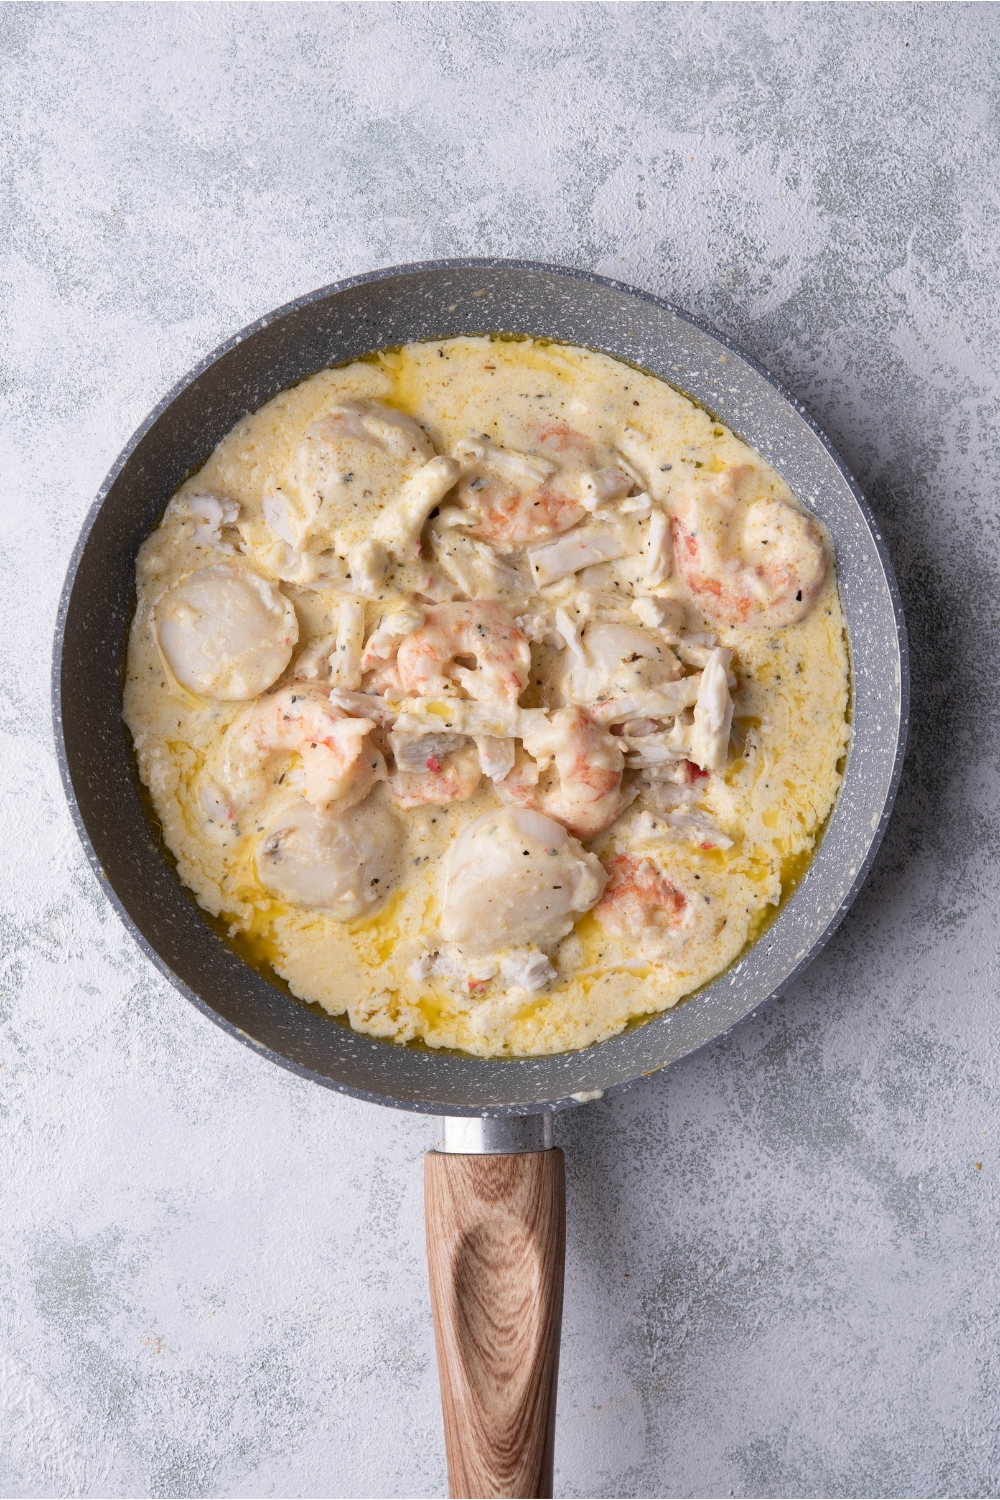 Skillet filled with scallops, shrimp, and crab meat in a seasoned cream sauce.